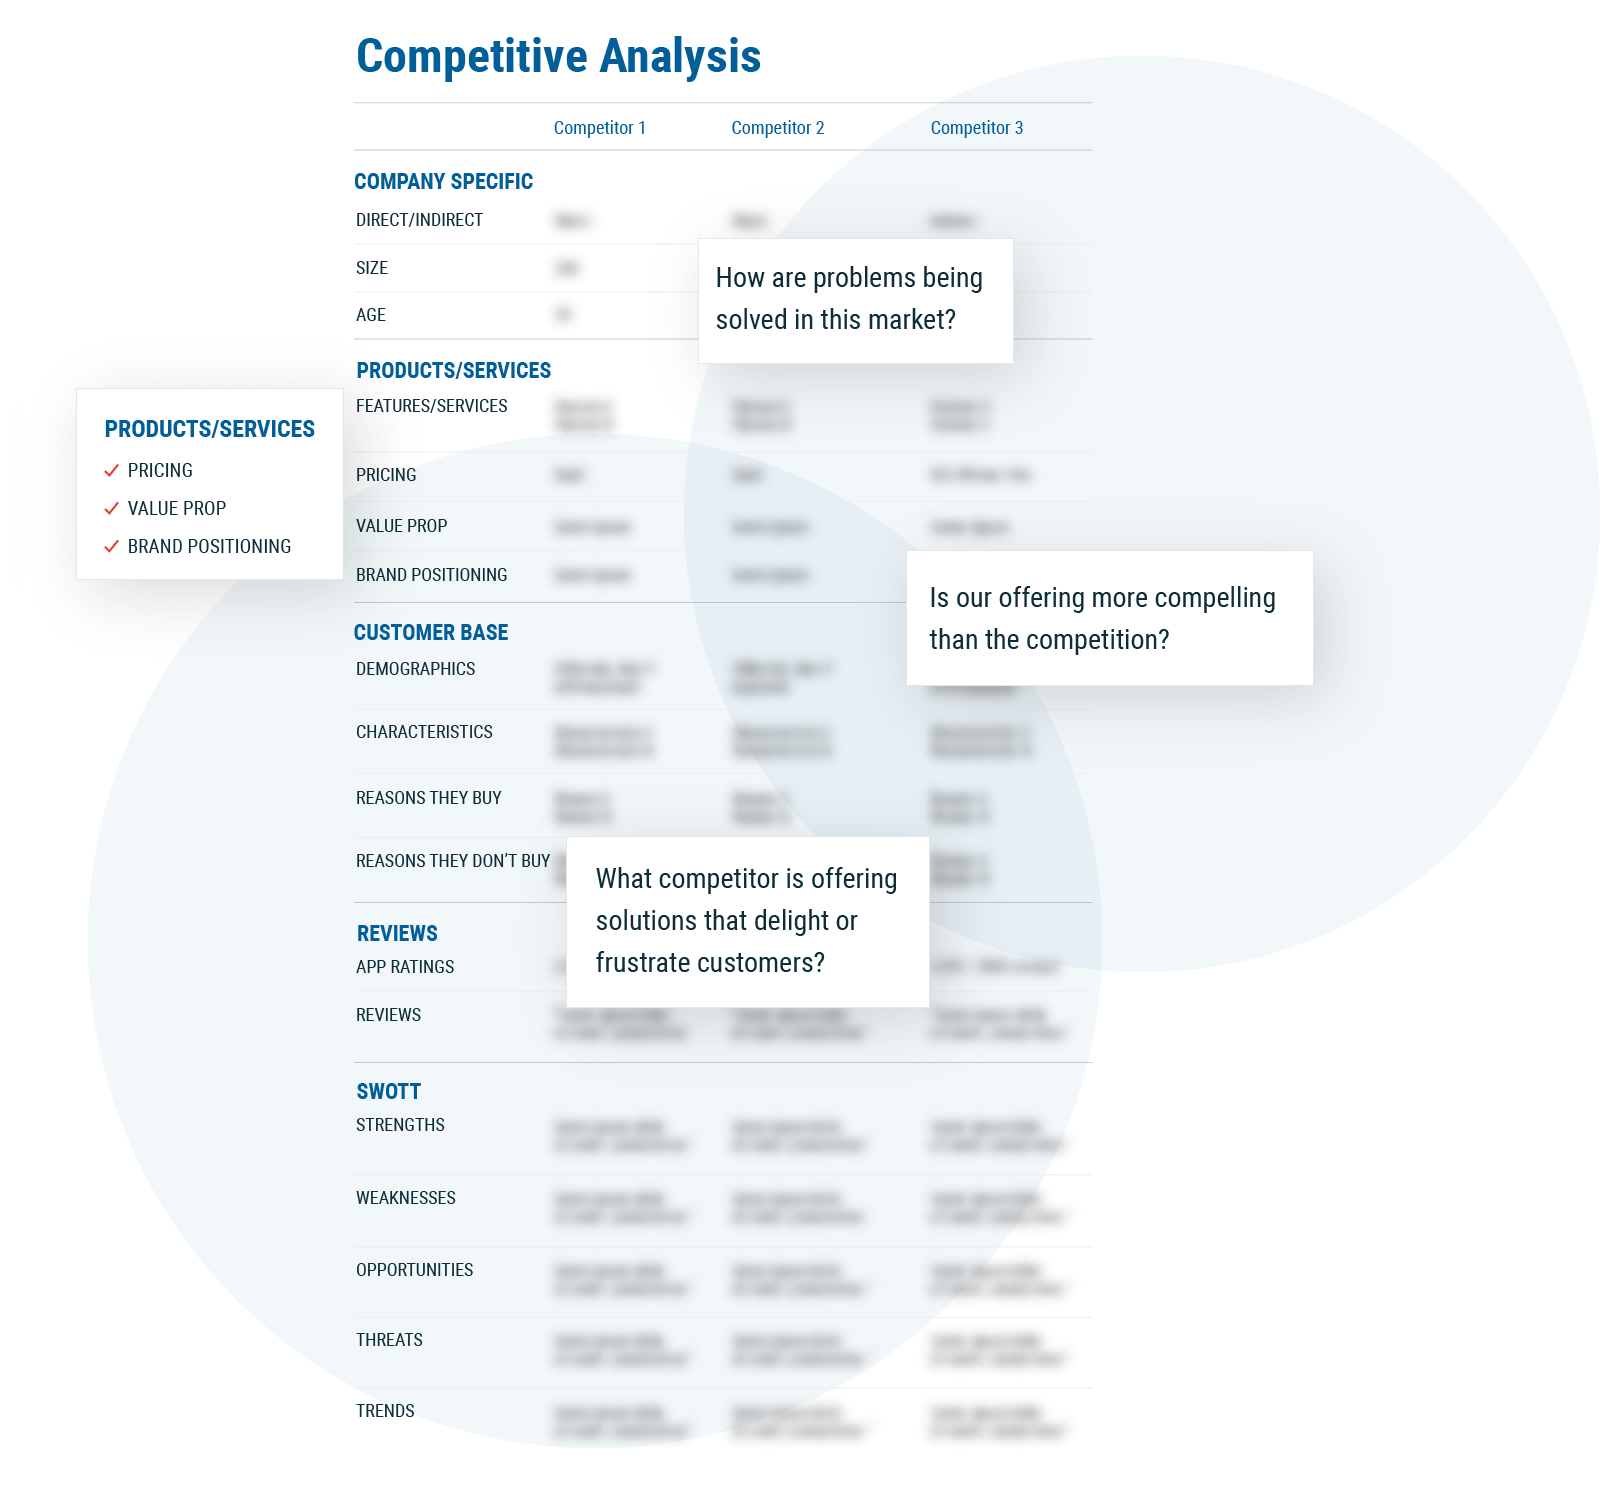 Example of competitive analysis report